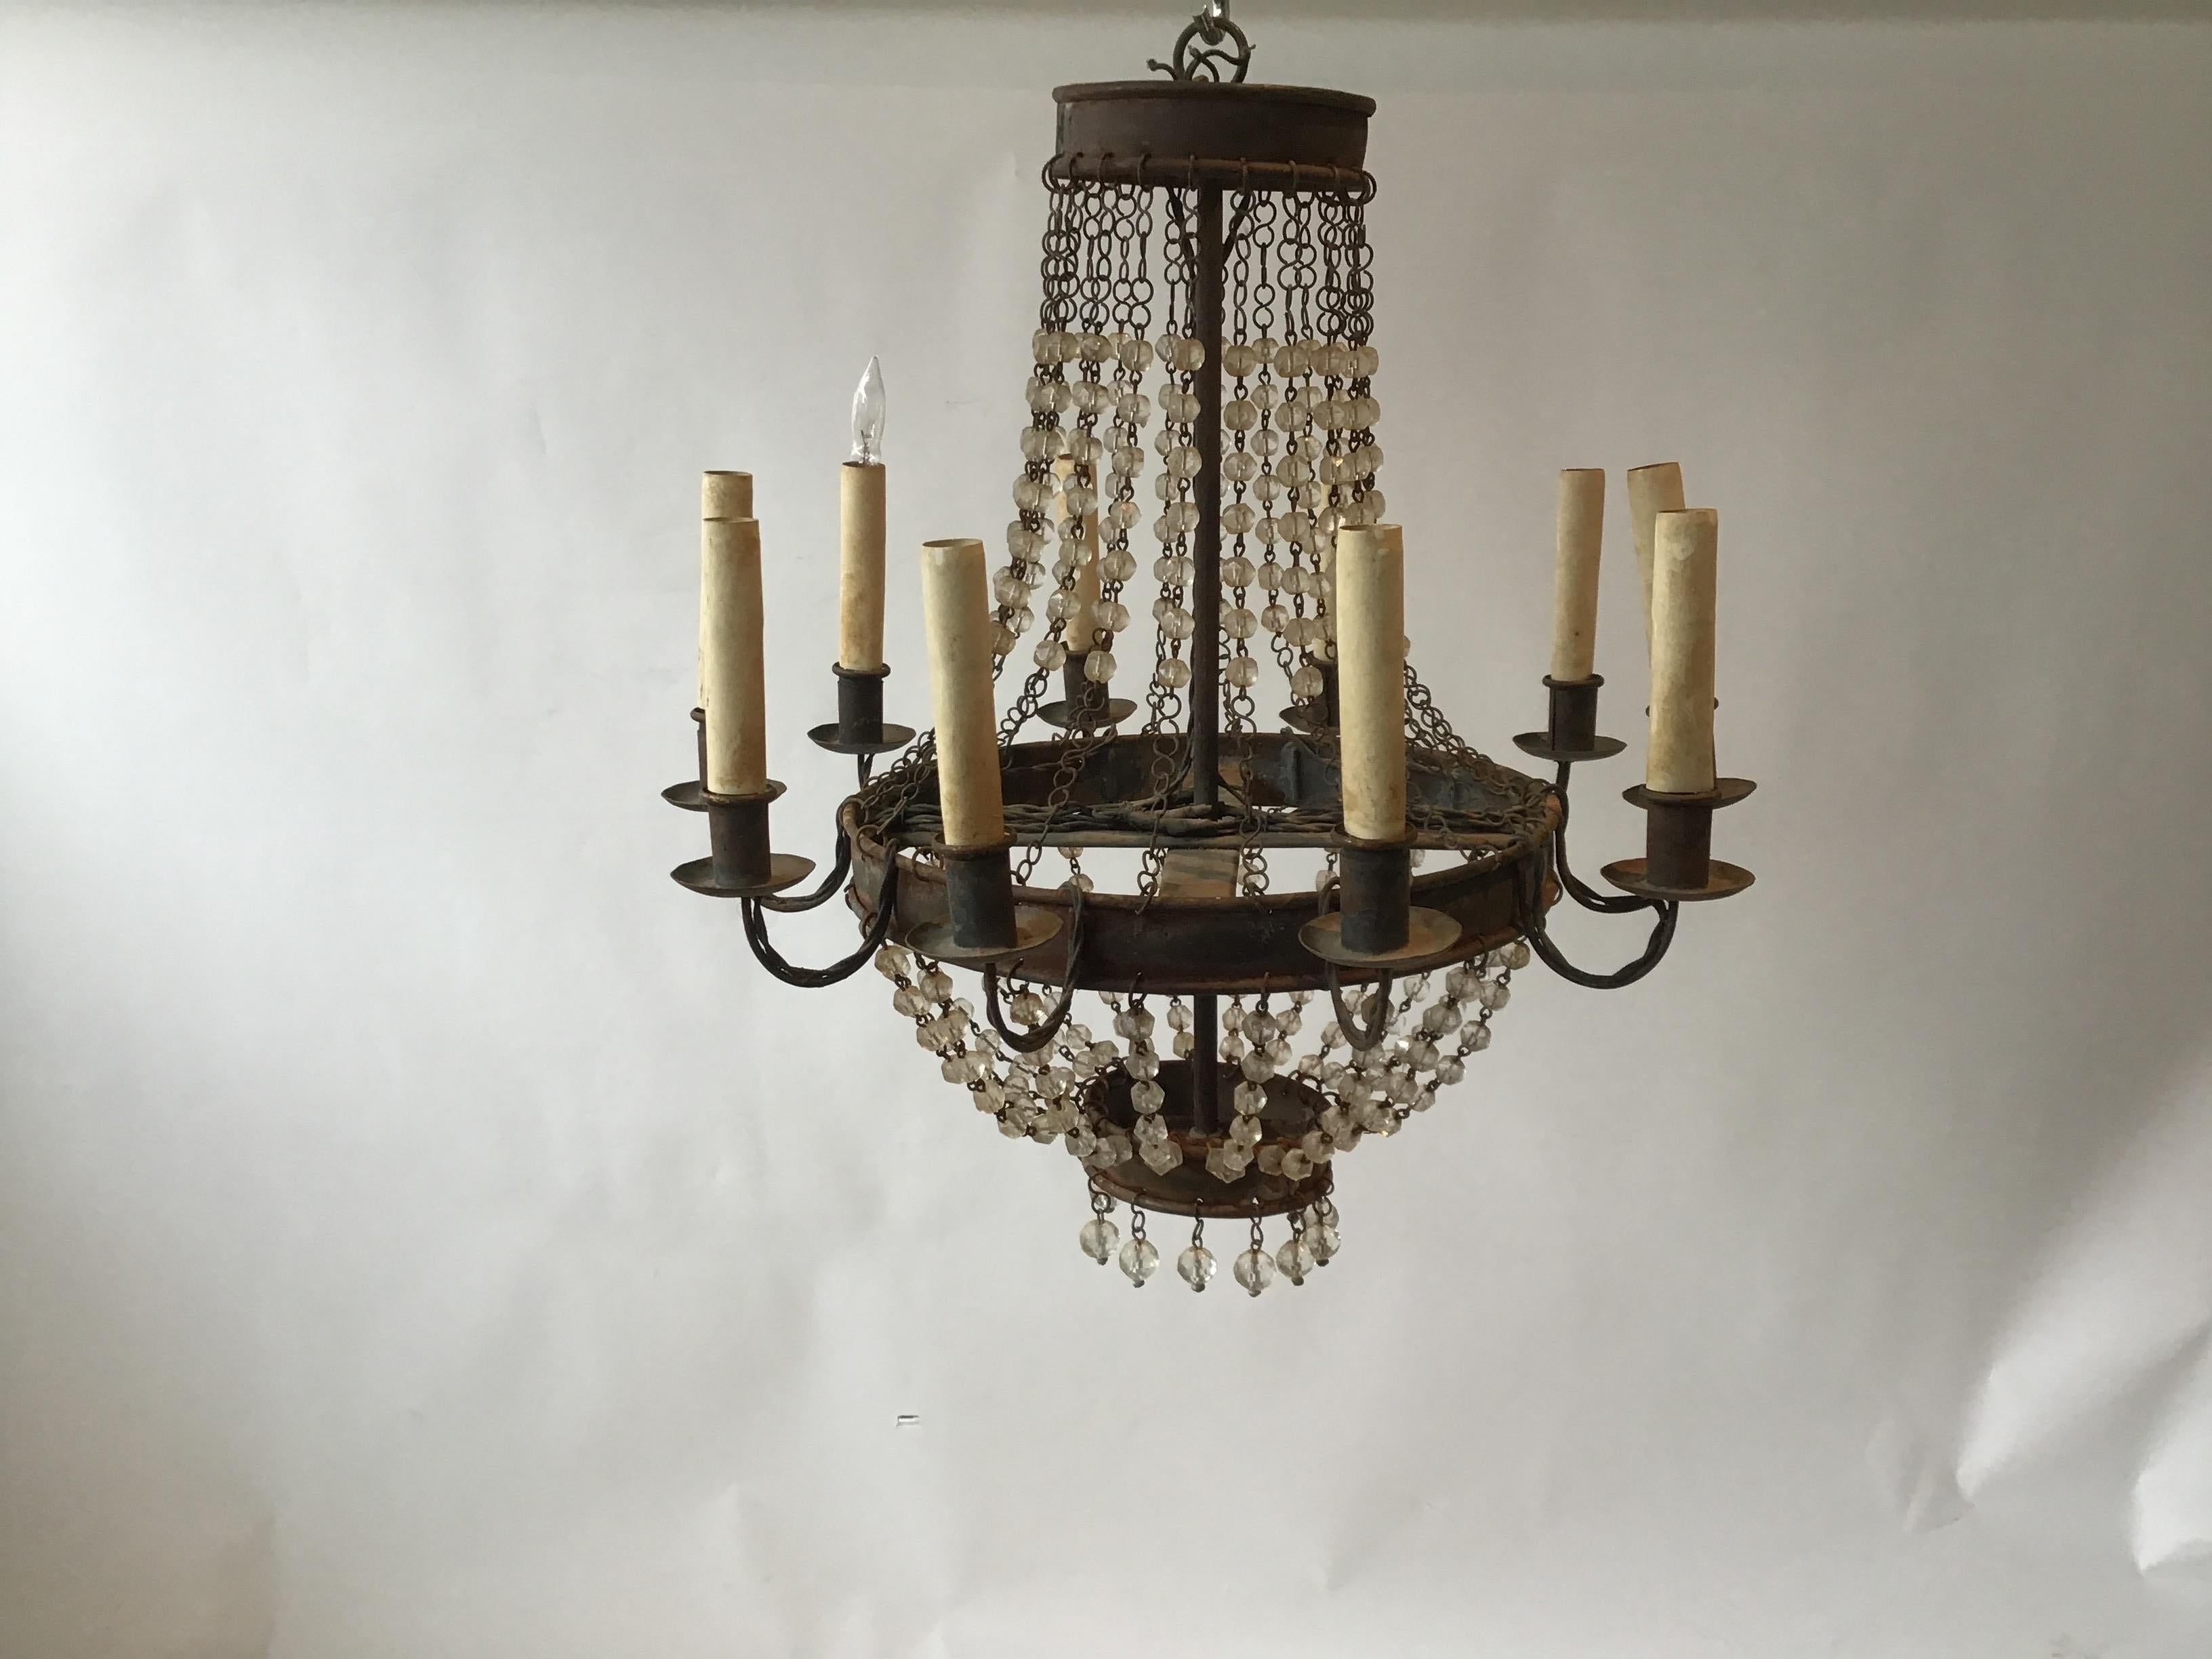 1960s iron and crystal chandelier. Some rust on metal. Has almost an industrial look to it.